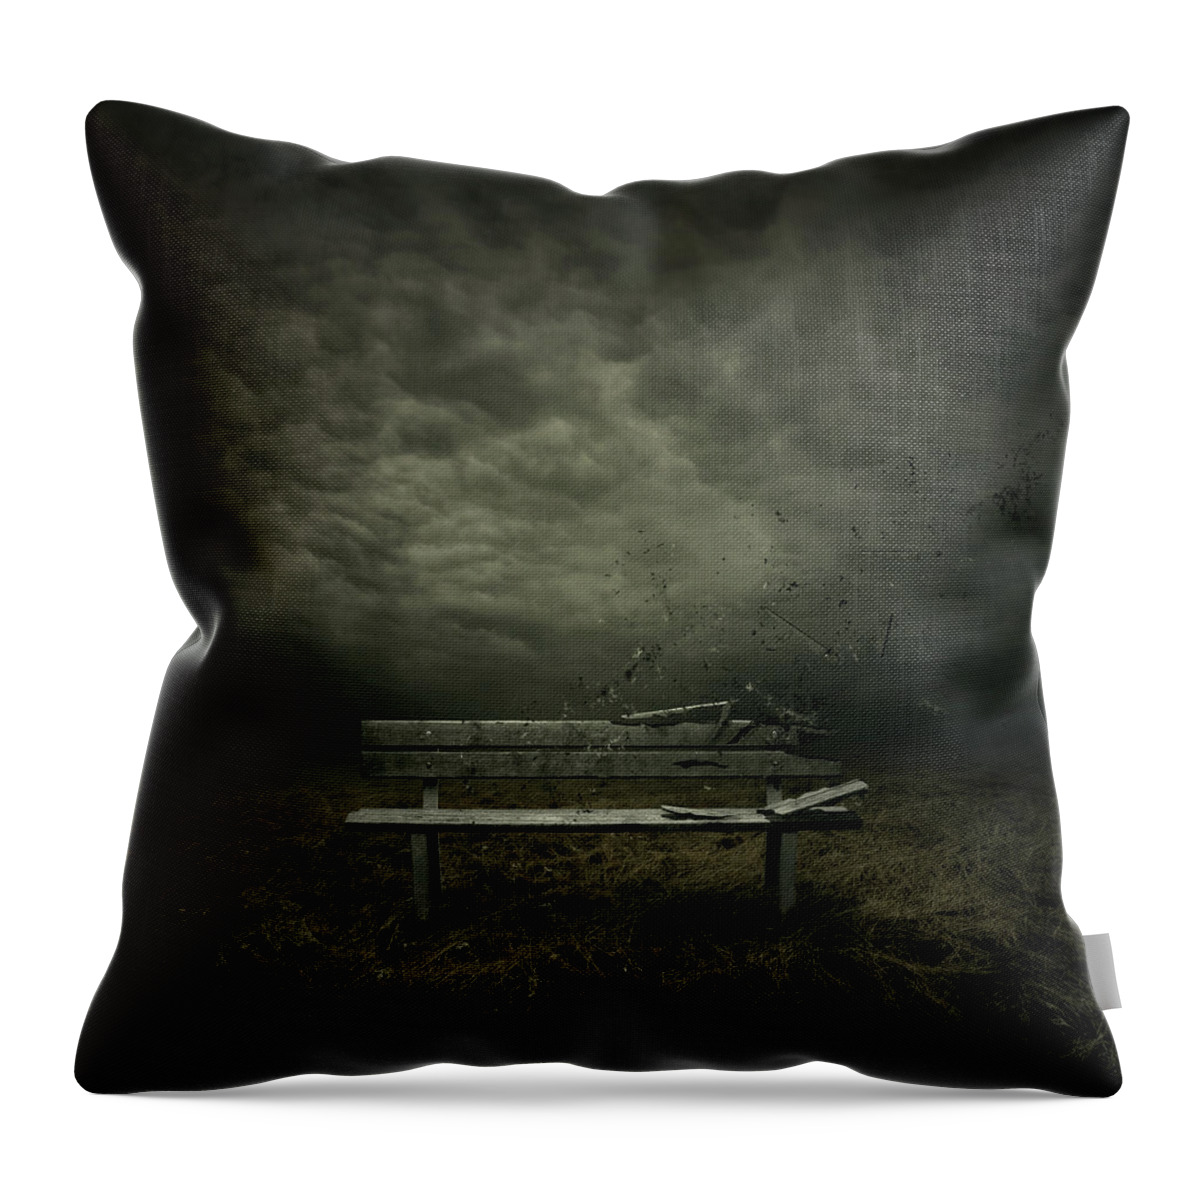 Bench Throw Pillow featuring the digital art Passing by Zoltan Toth